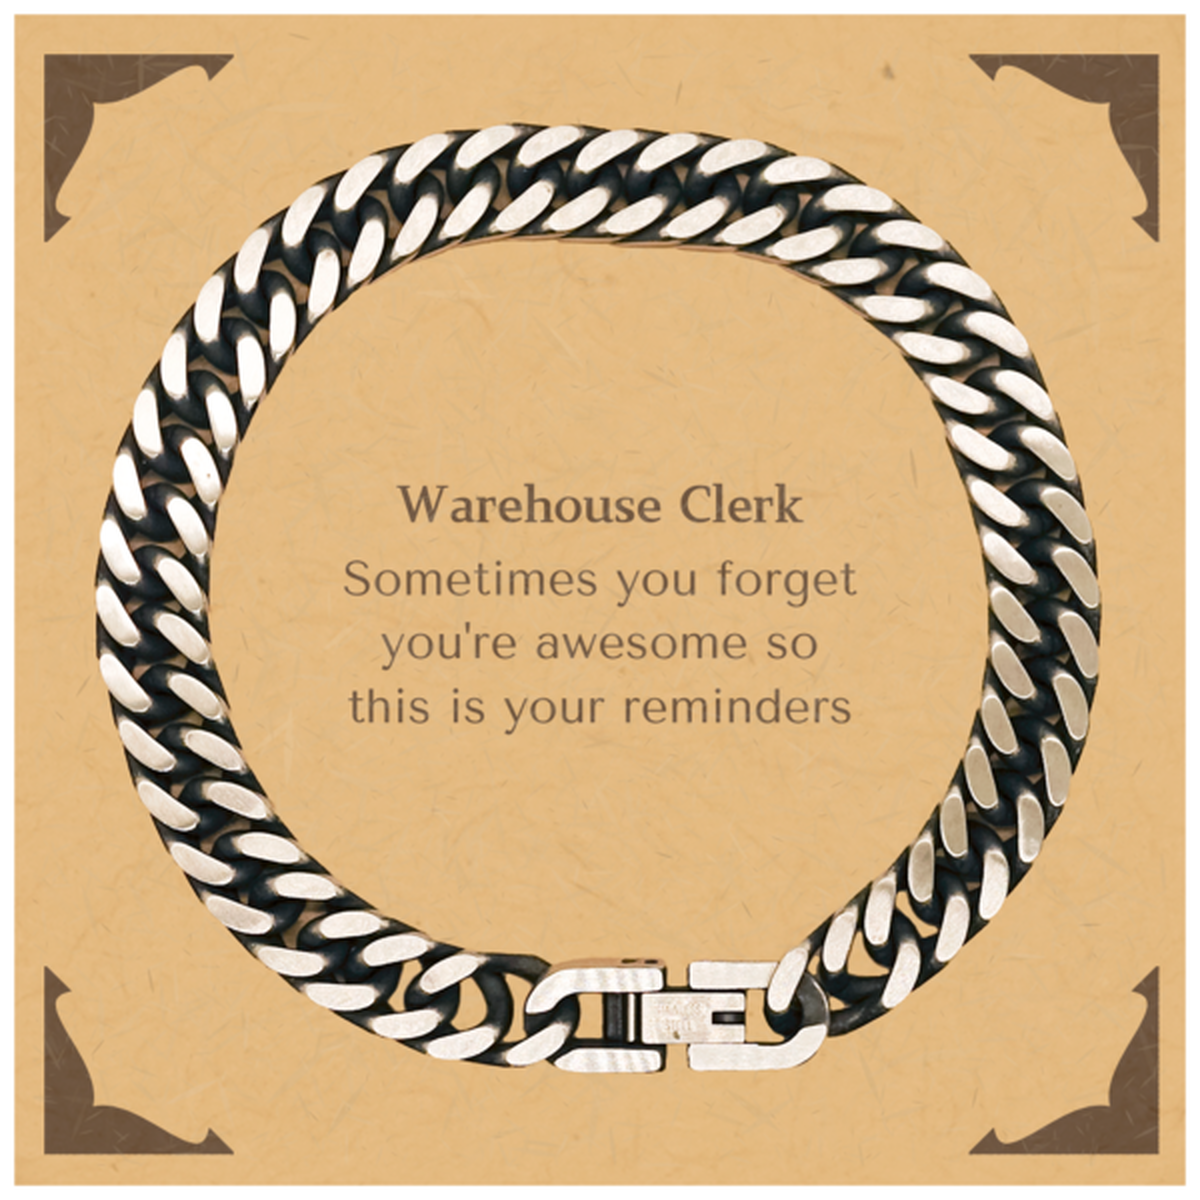 Sentimental Warehouse Clerk Cuban Link Chain Bracelet, Warehouse Clerk Sometimes you forget you're awesome so this is your reminders, Graduation Christmas Birthday Gifts for Warehouse Clerk, Men, Women, Coworkers